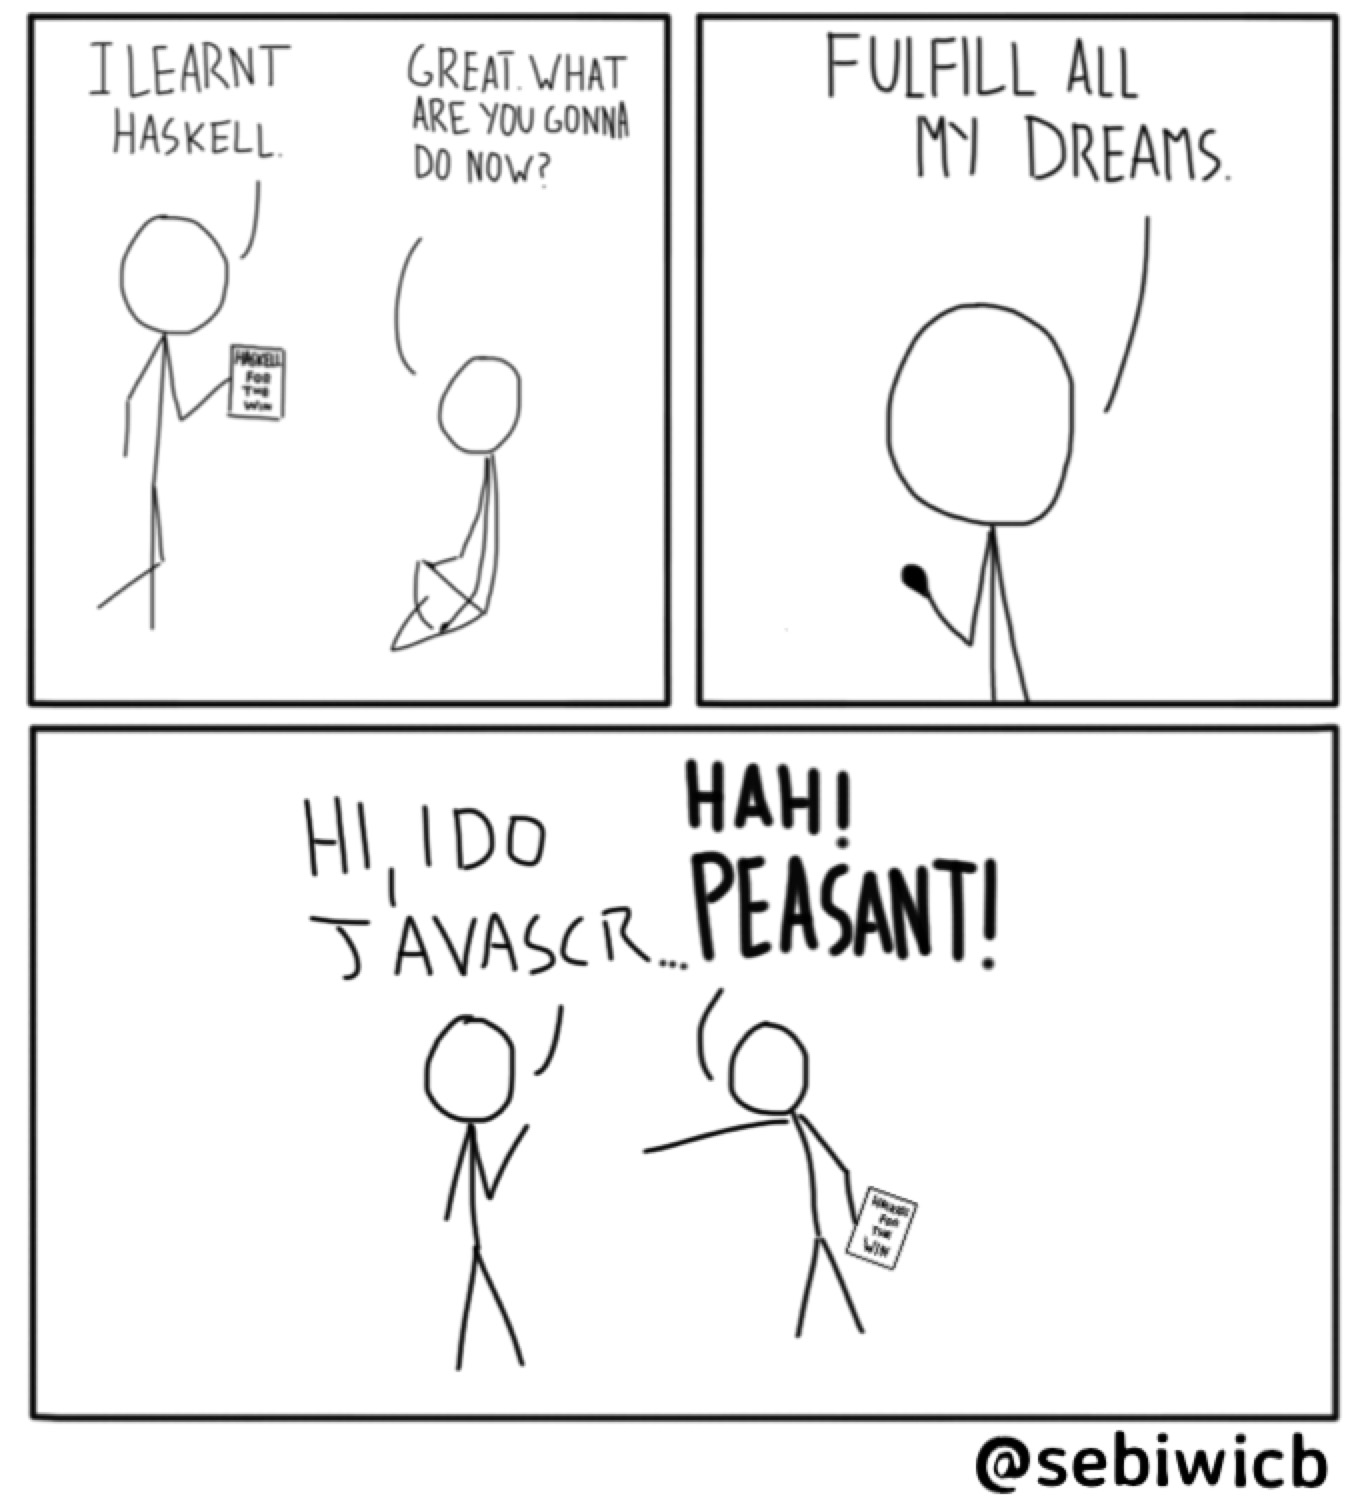 I learnt Haskell. I can fullfill my dreams now. Hi I do Javascr... HAH! PEASANT!